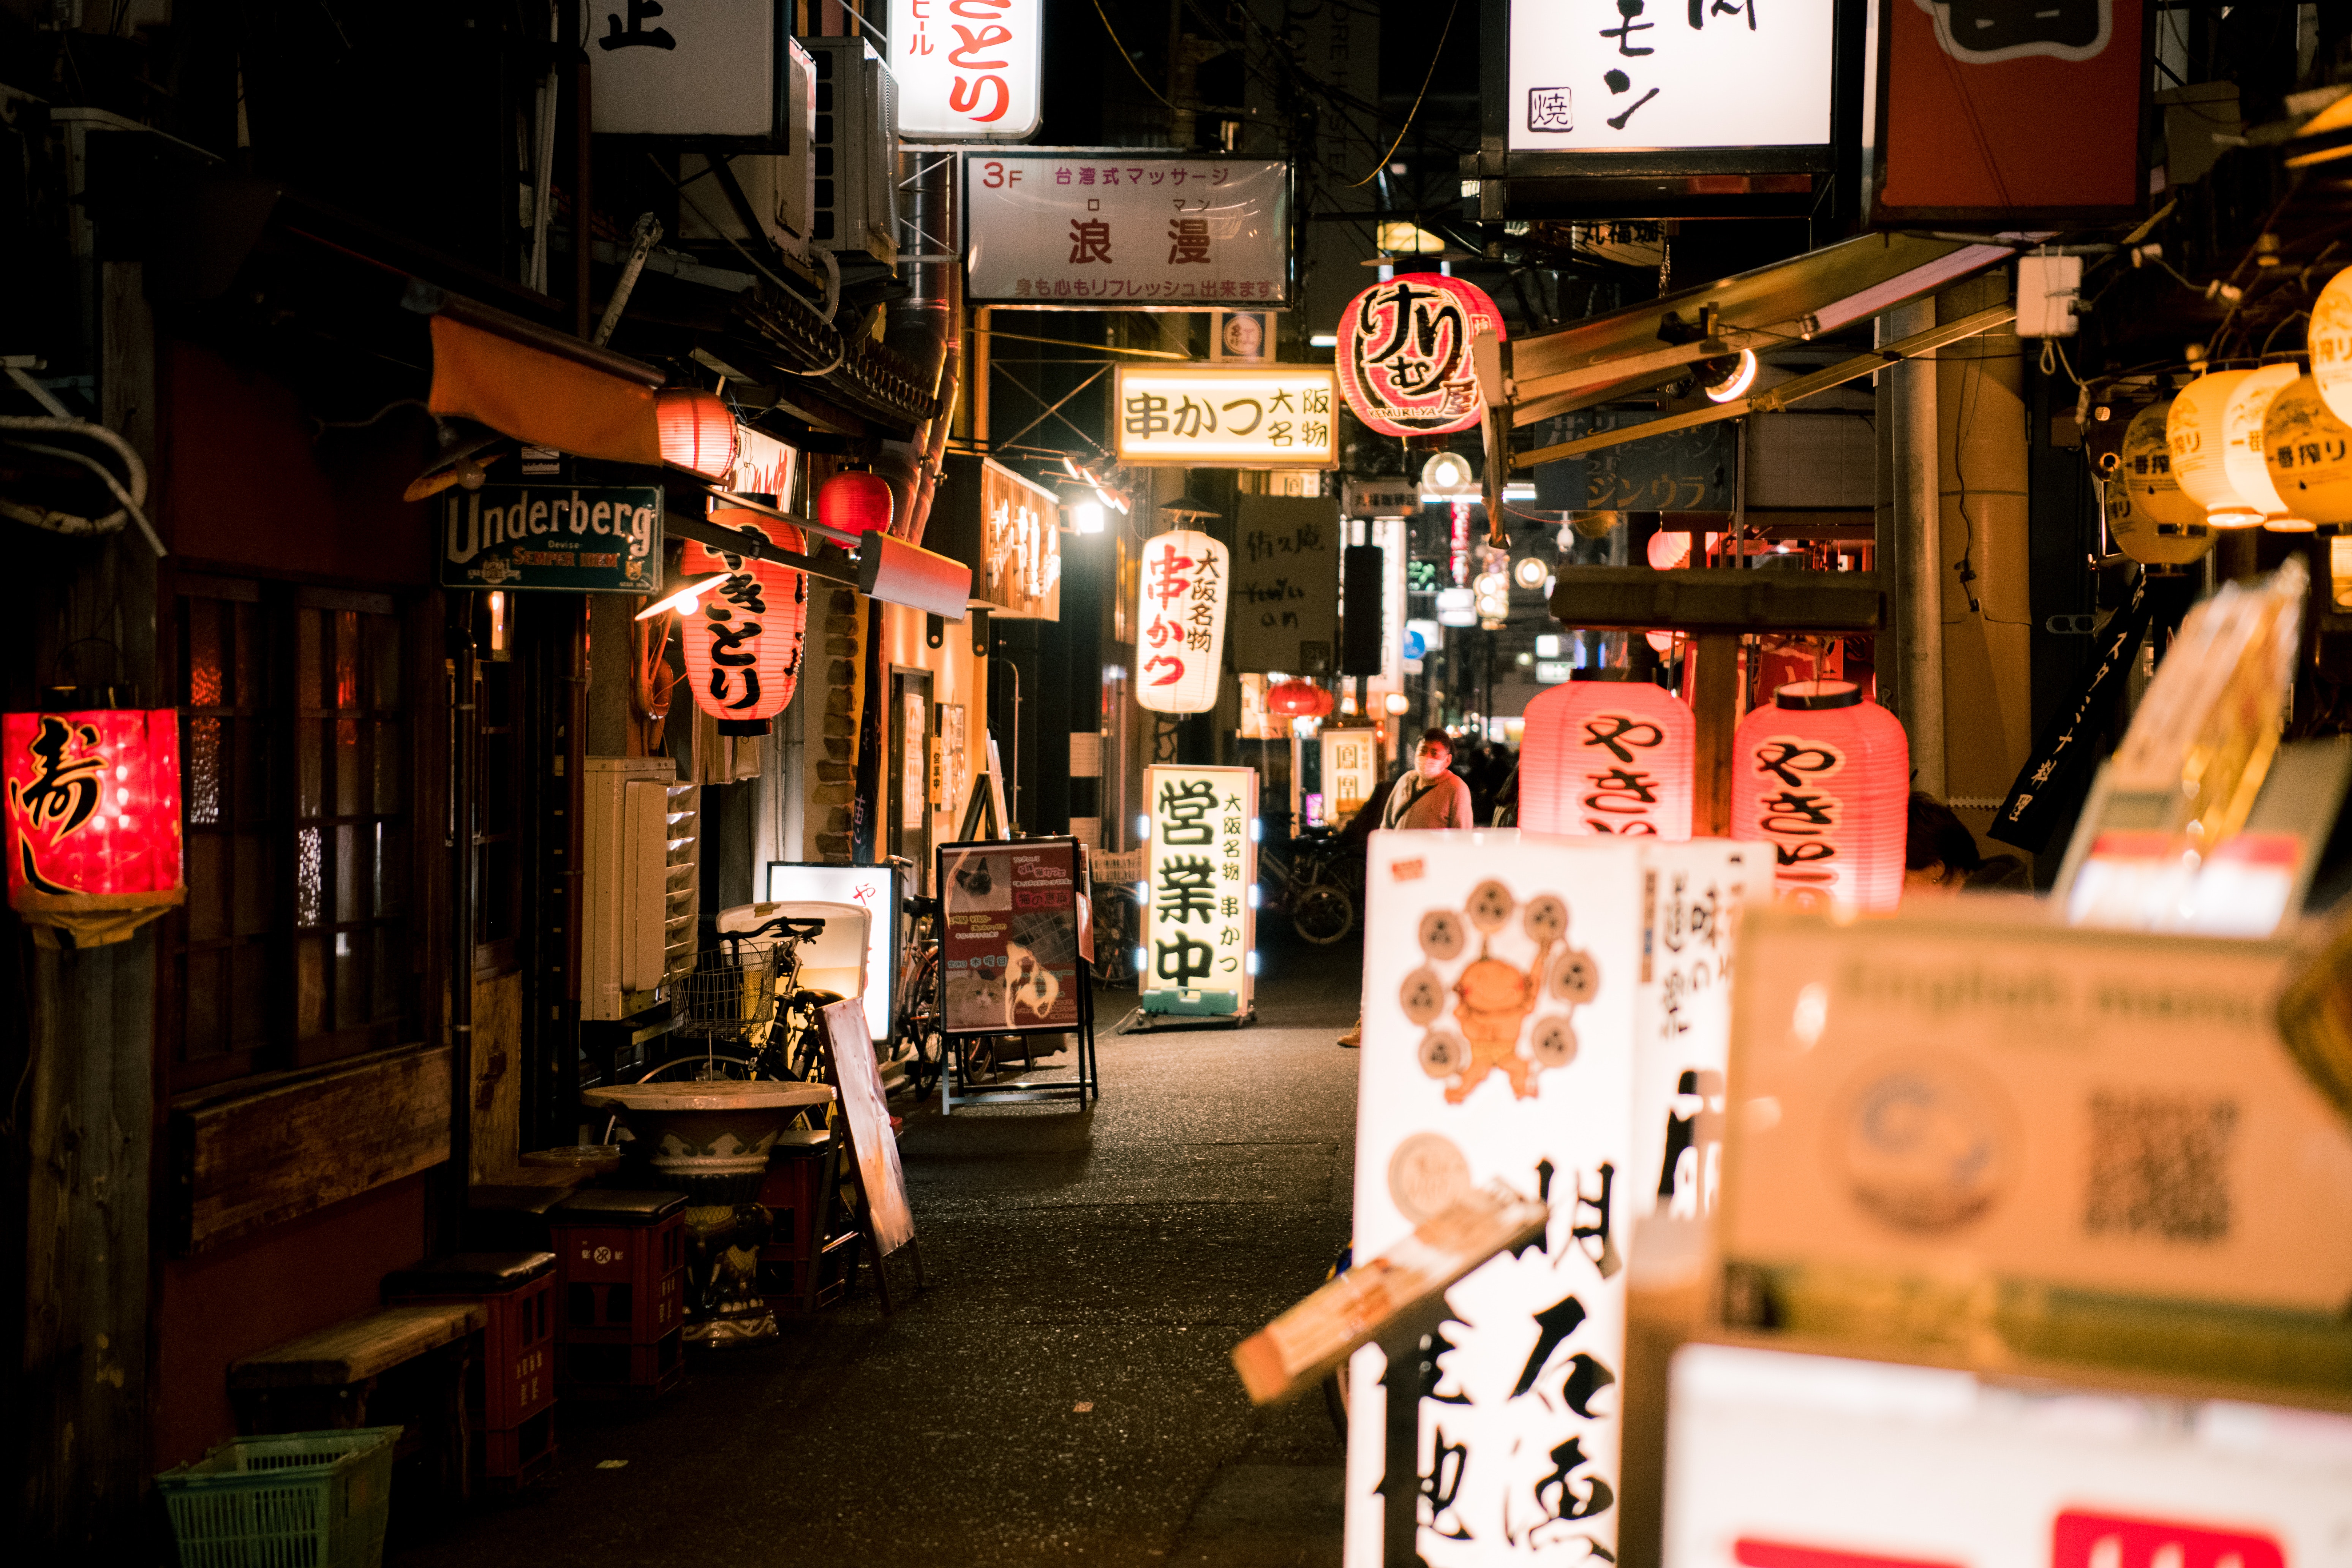 Traditional Japanese paper lanterns light up a small lane full of shops in Tokyo.